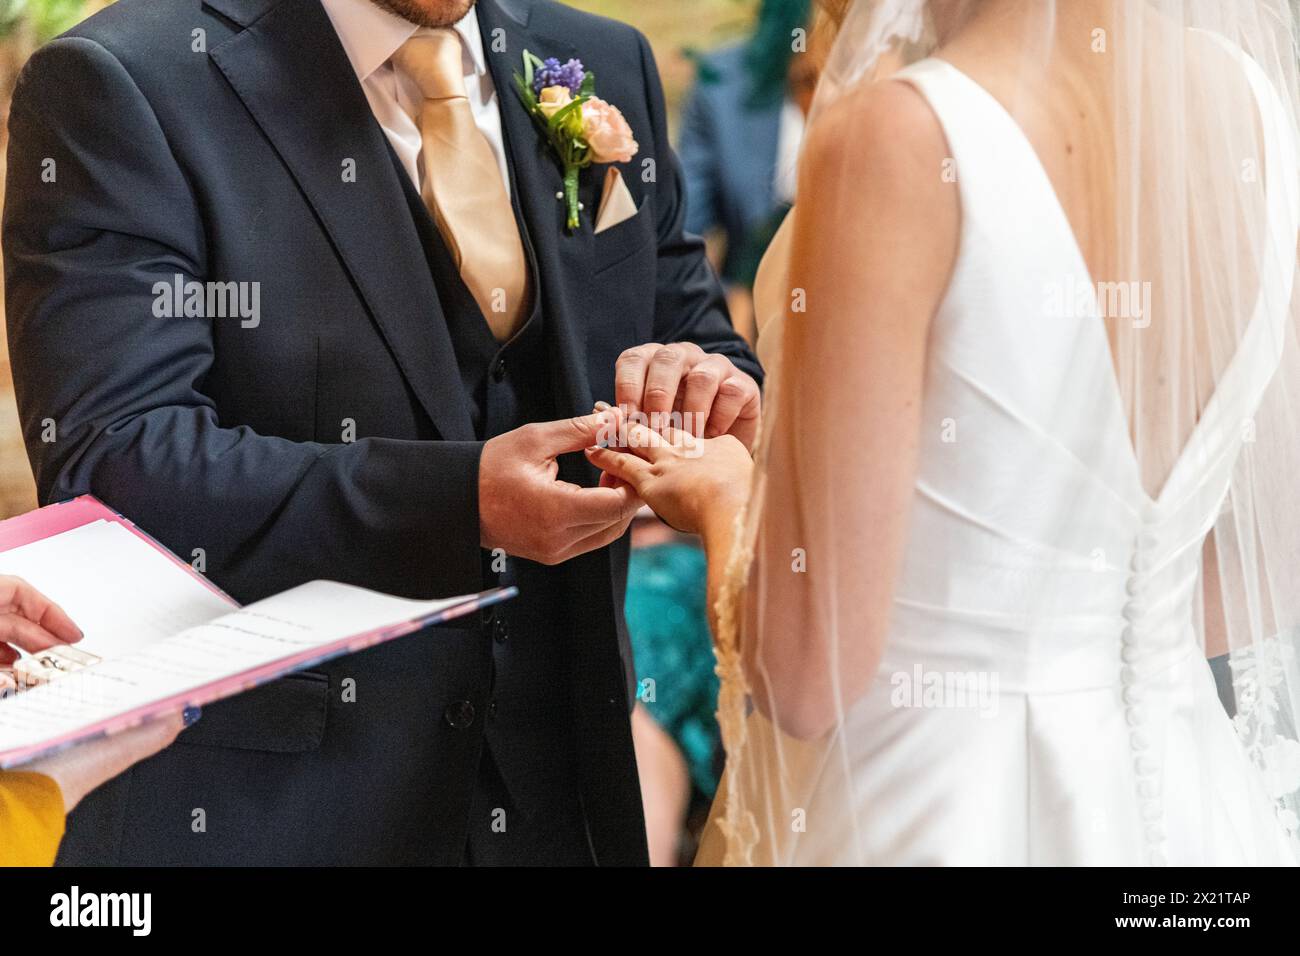 A bride and groom couple exchanging wedding vows and rings at a service ceremony during a wedding at Botley Hill Farm in Surrey, UK Stock Photo